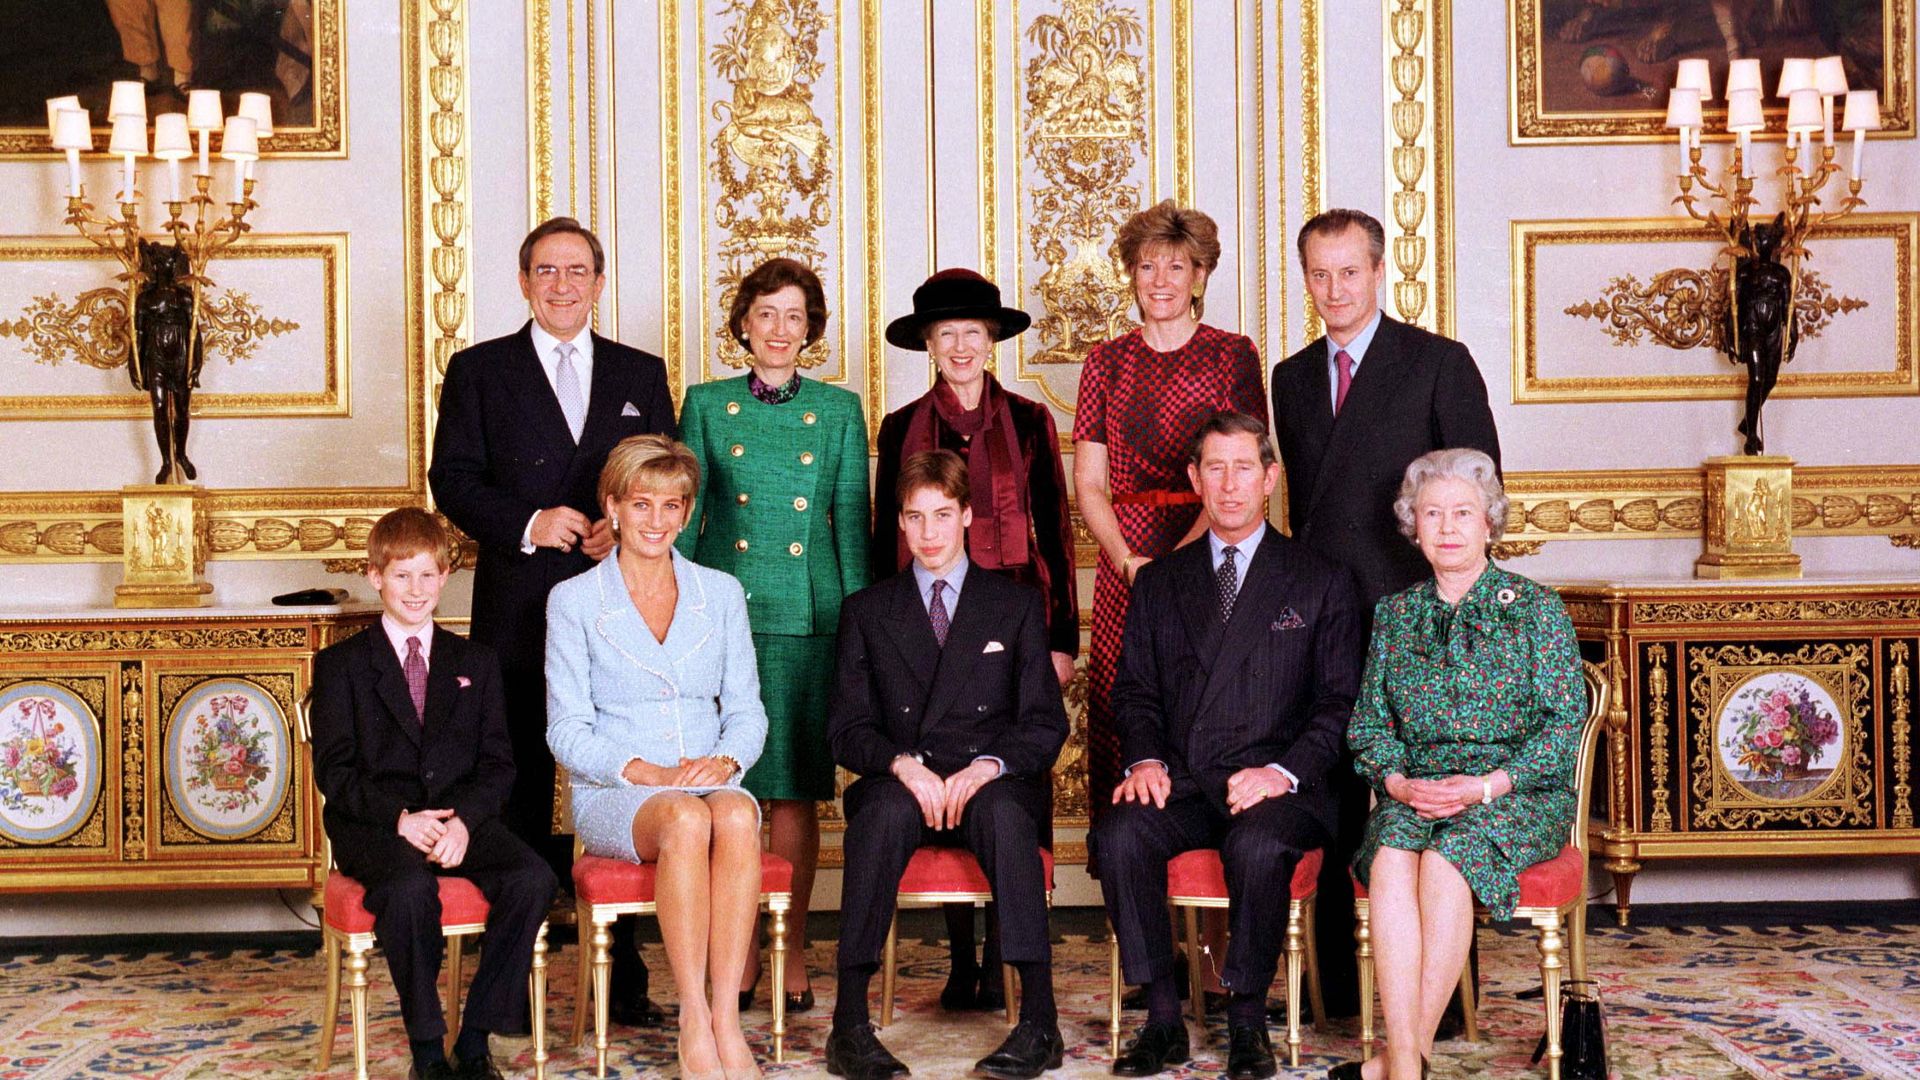 Prince William sat with Prince Harry and Princess Diana on the left and King Charles and the Queen on the right